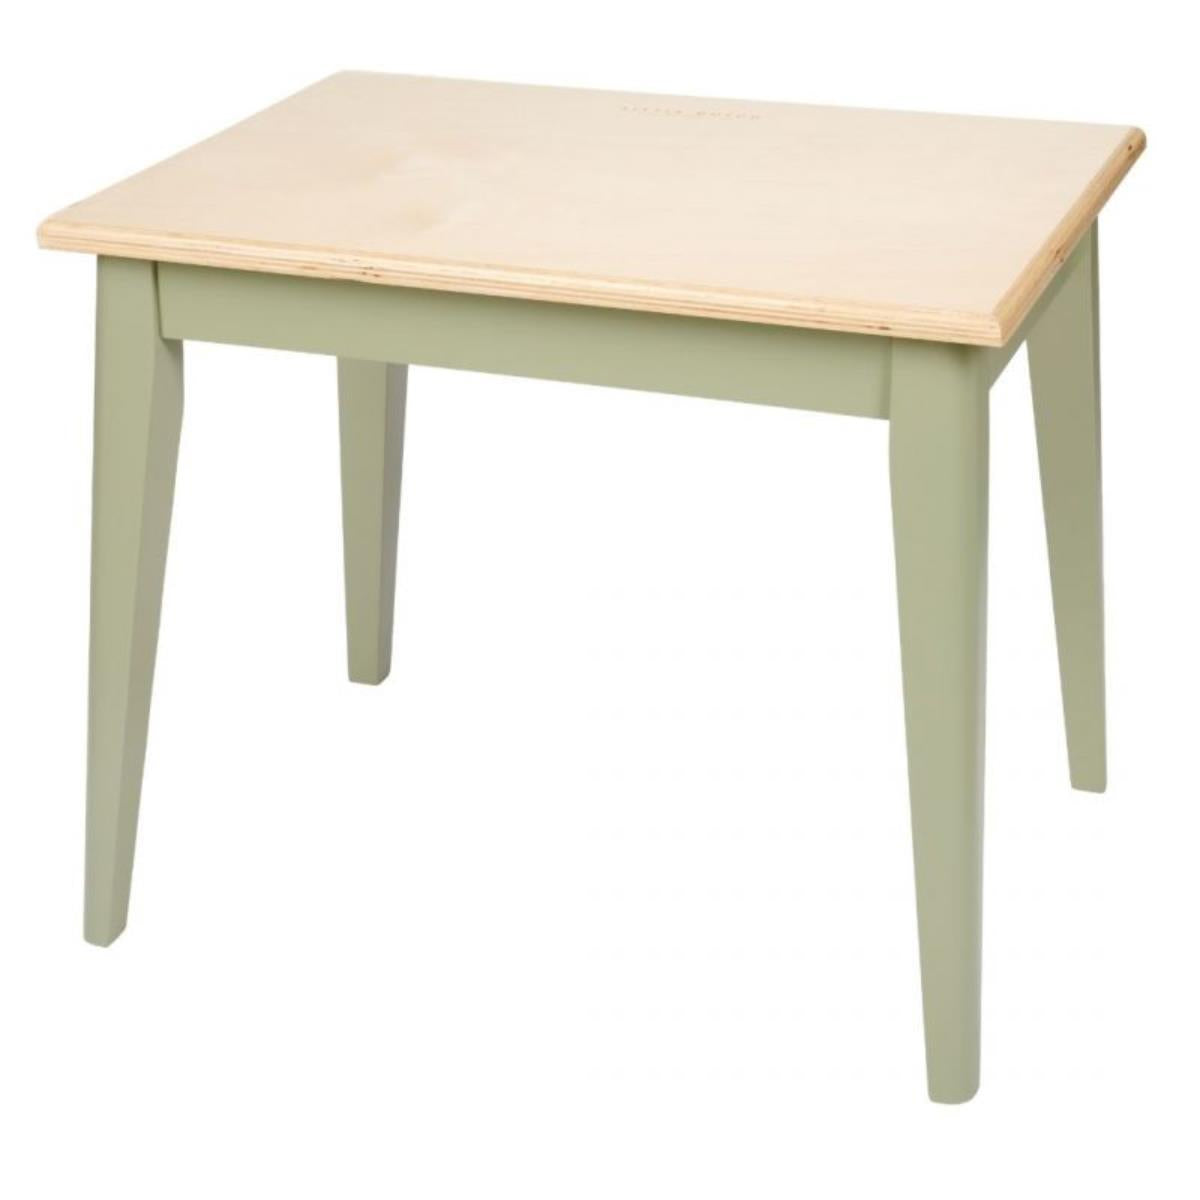 Olive lacquered wood table - LD4955